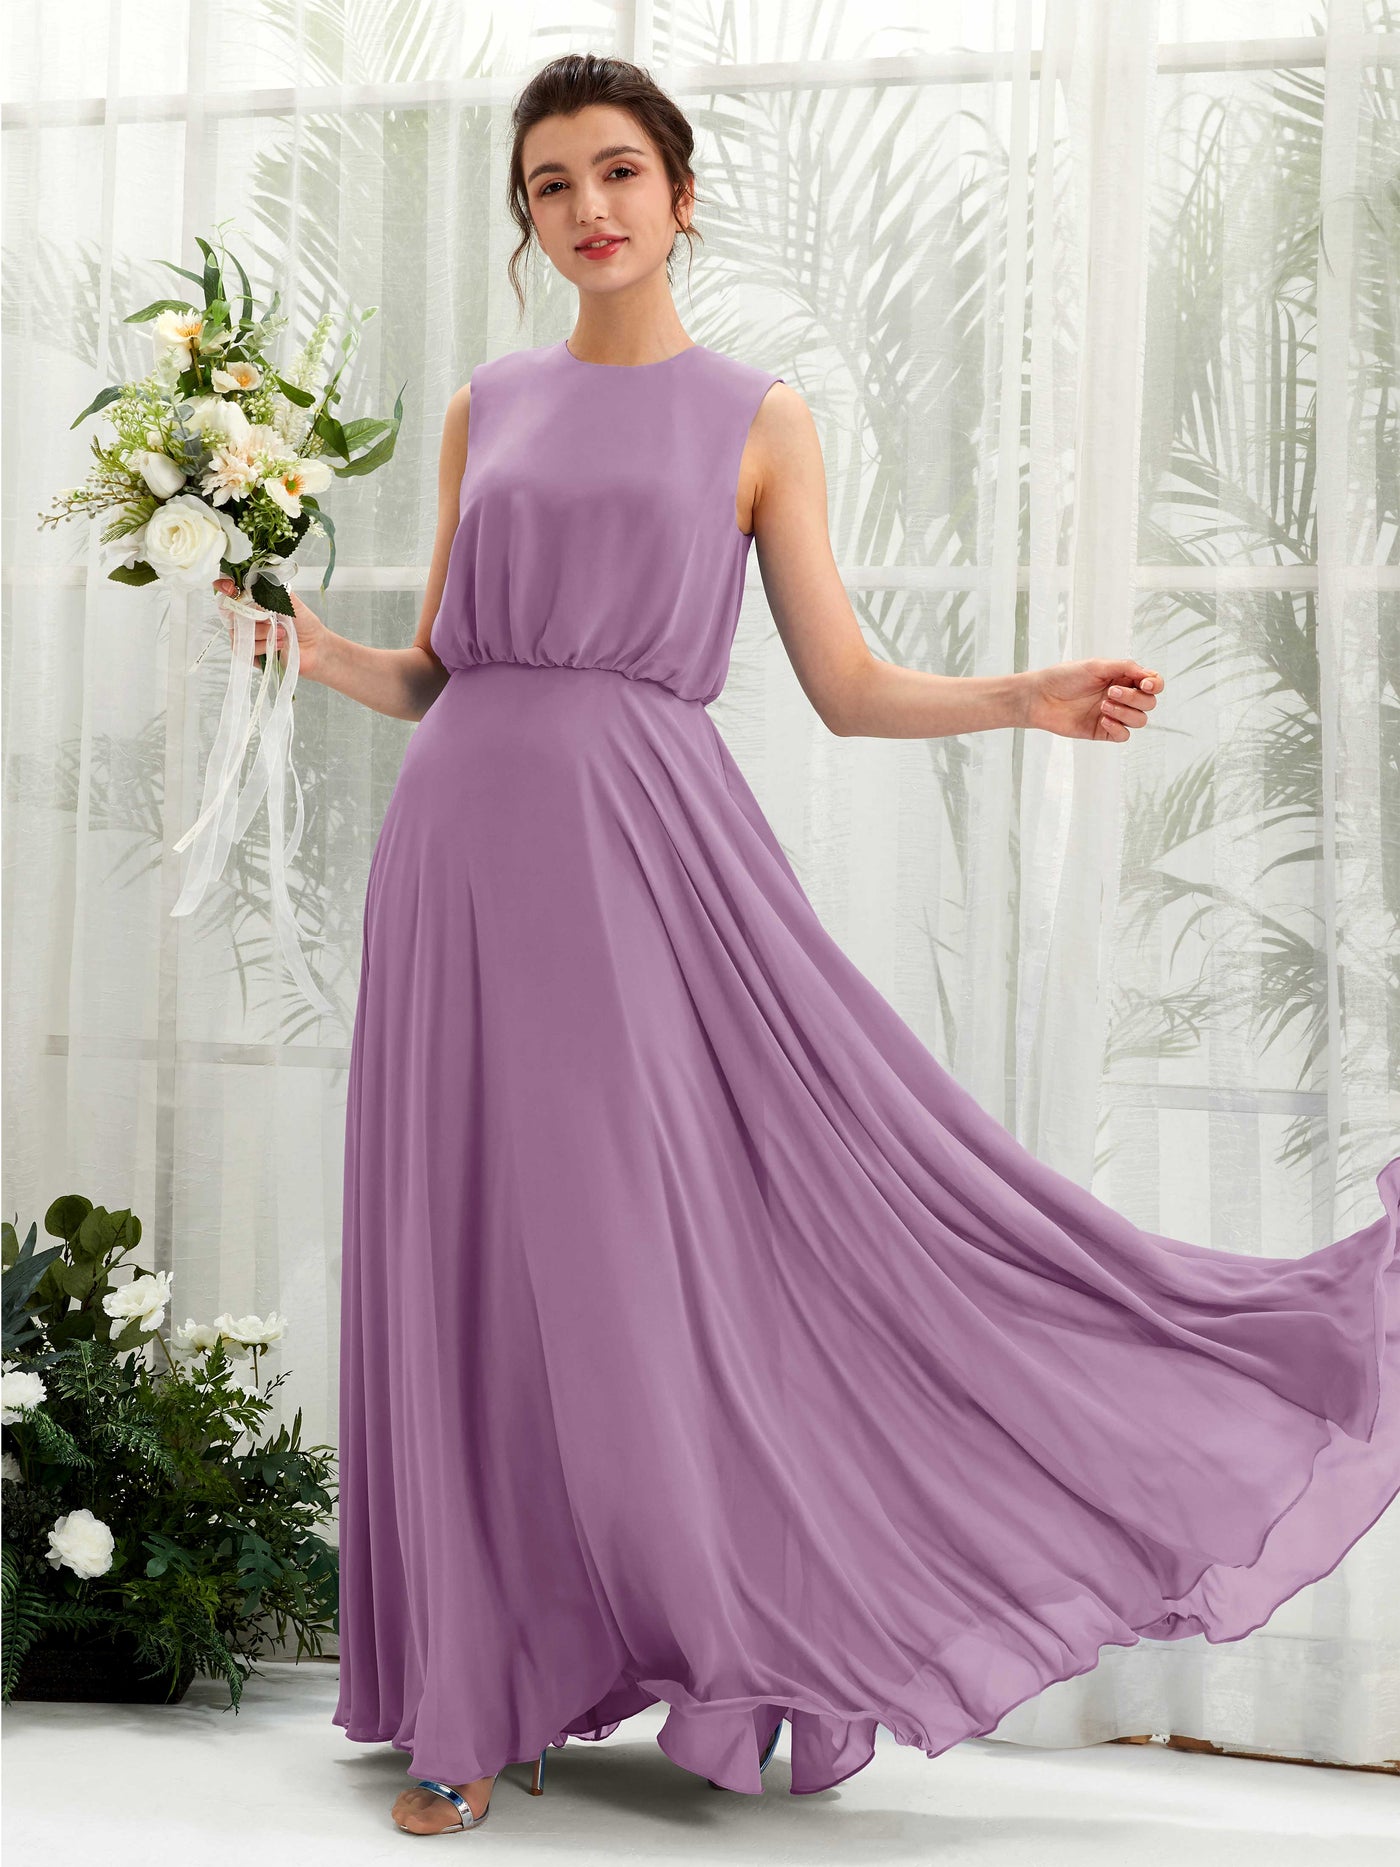 Orchid Mist Bridesmaid Dresses Bridesmaid Dress A-line Chiffon Round Full Length Sleeveless Wedding Party Dress (81222821)#color_orchid-mist